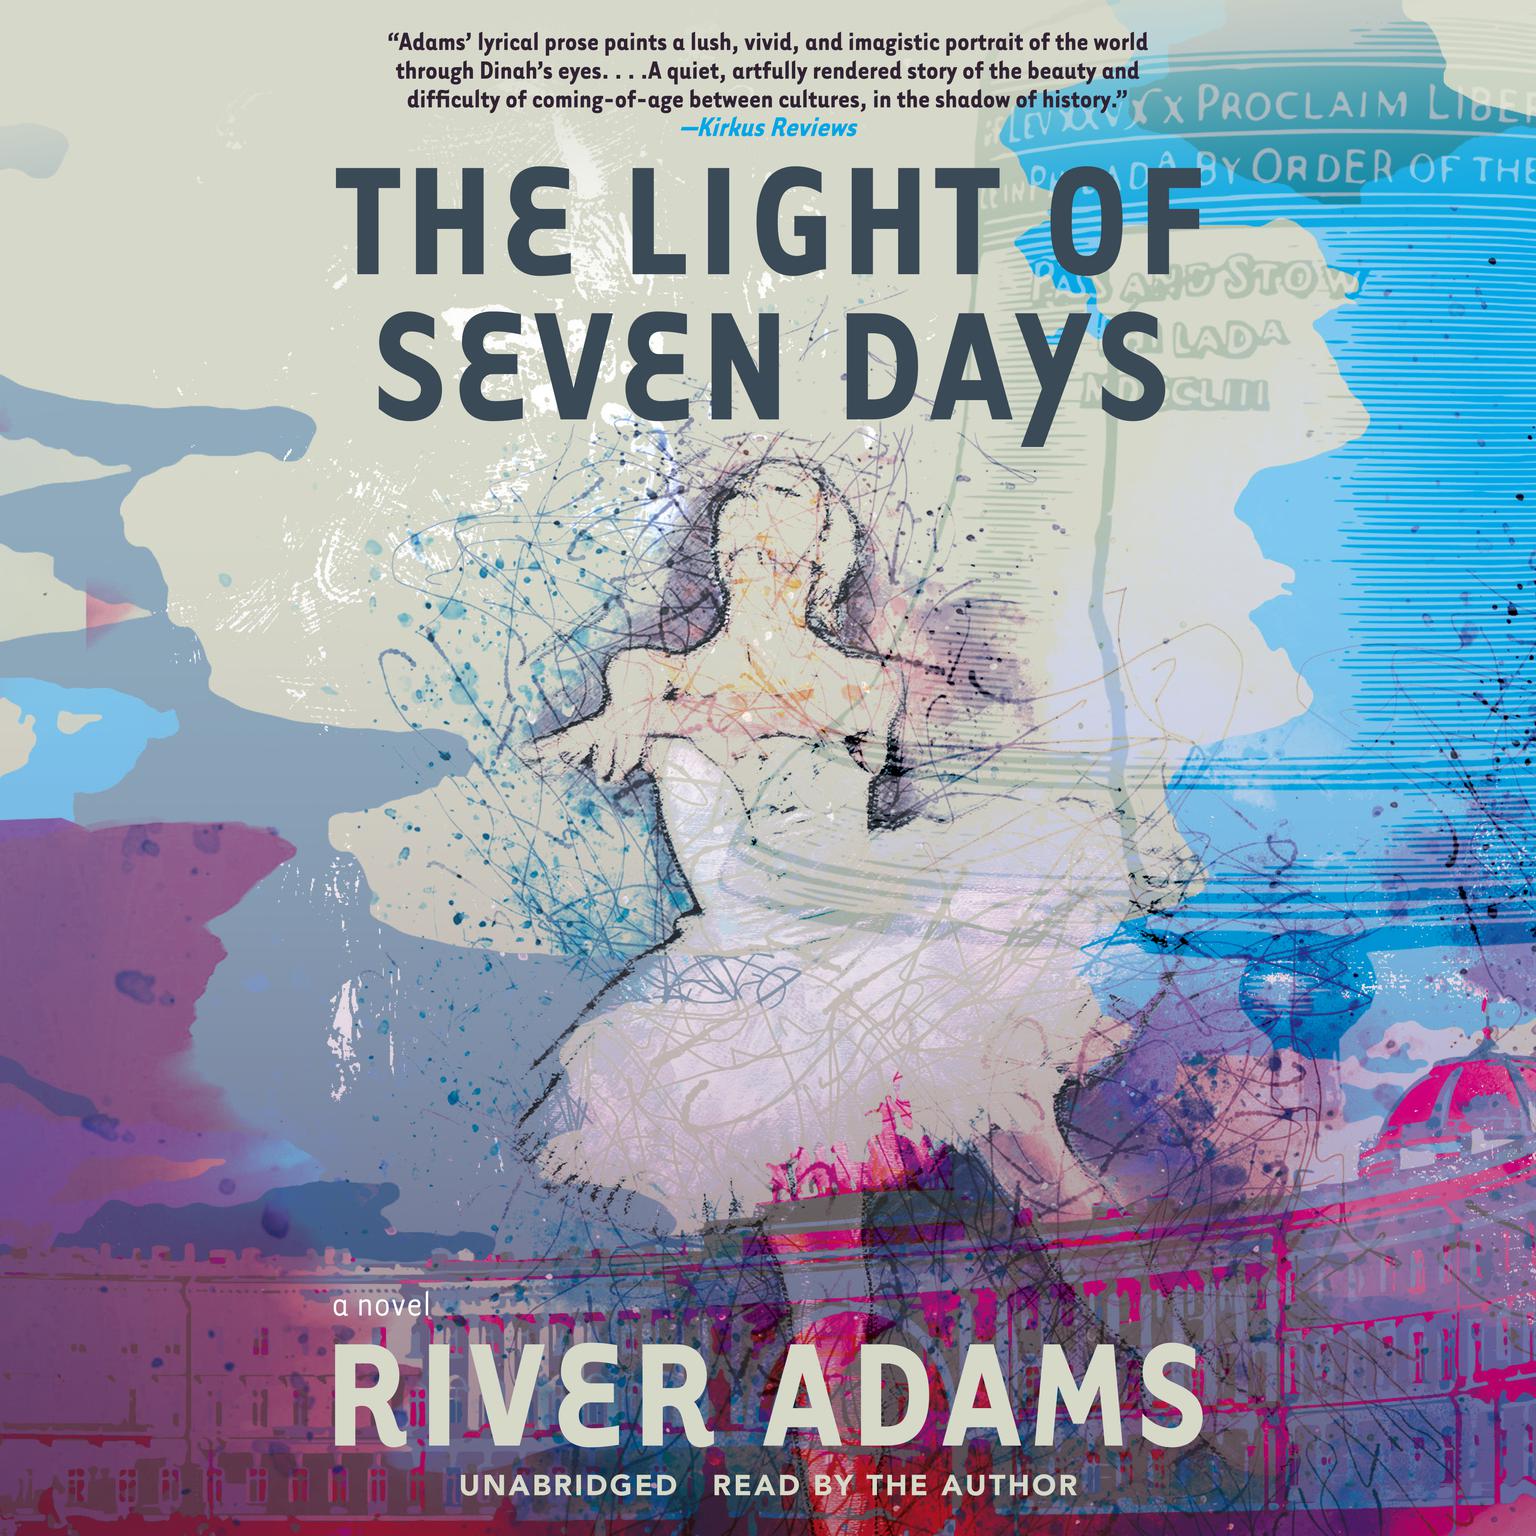 The Light of Seven Days: A Novel Audiobook, by River Adams